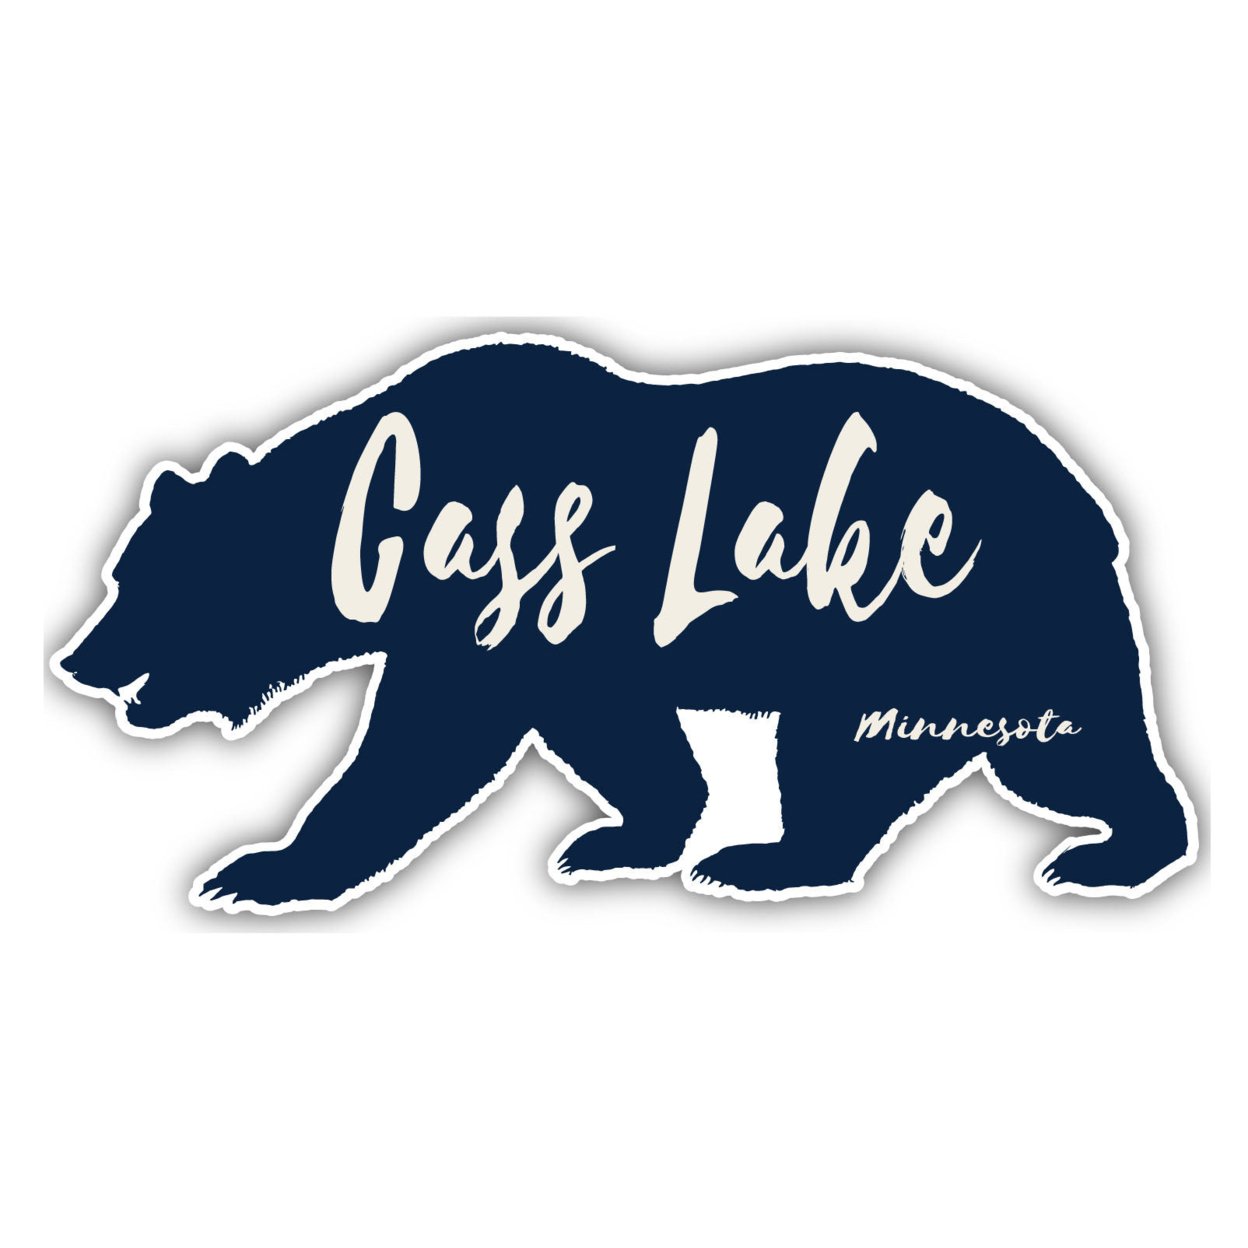 Cass Lake Minnesota Souvenir Decorative Stickers (Choose Theme And Size) - 4-Pack, 8-Inch, Tent